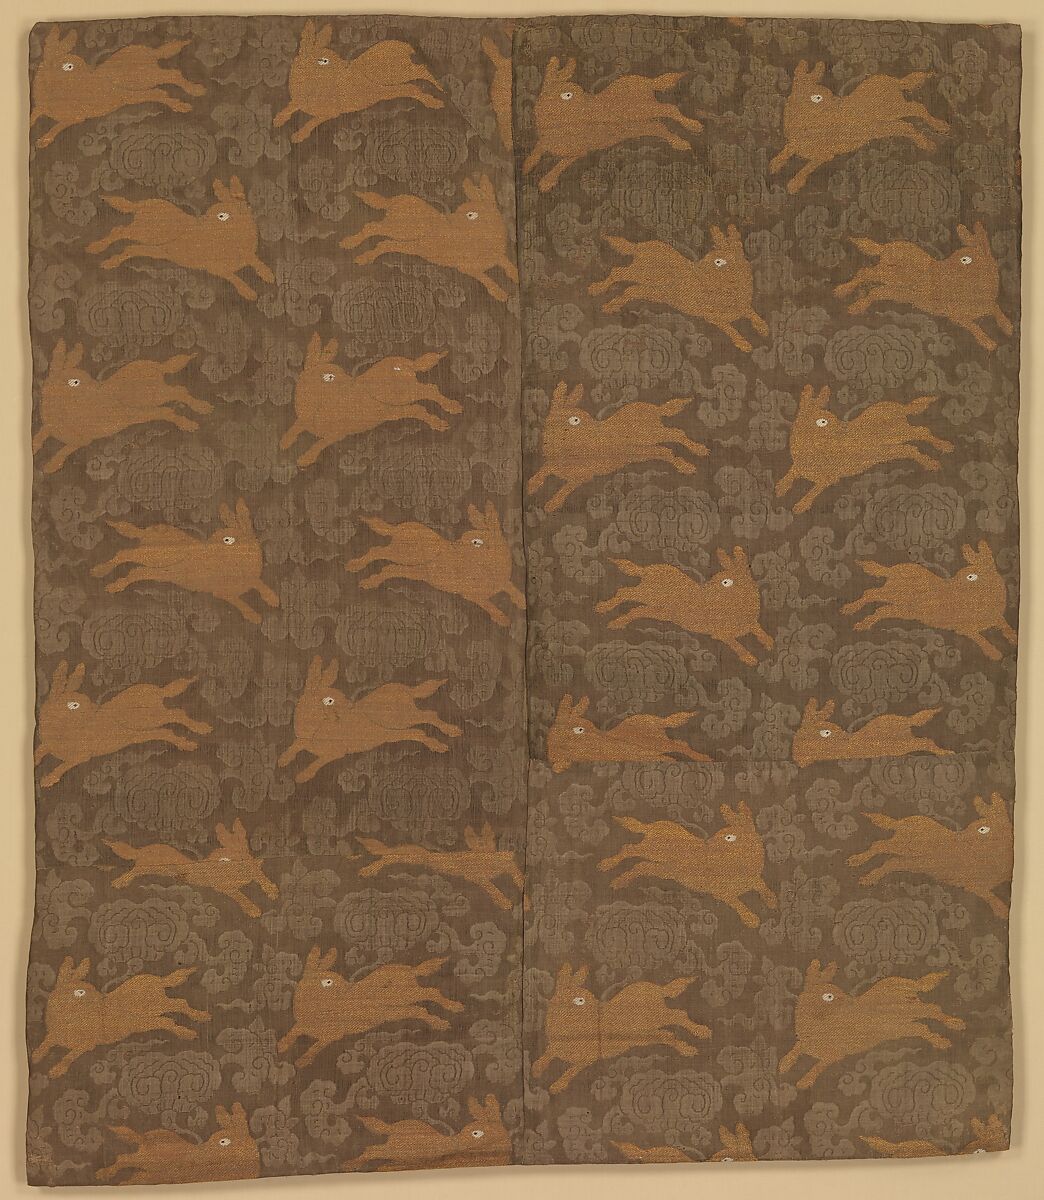 Panel with Rabbits amid Clouds, Silk gauze with plain-weave patterning, brocaded with silk and metallic thread, China 